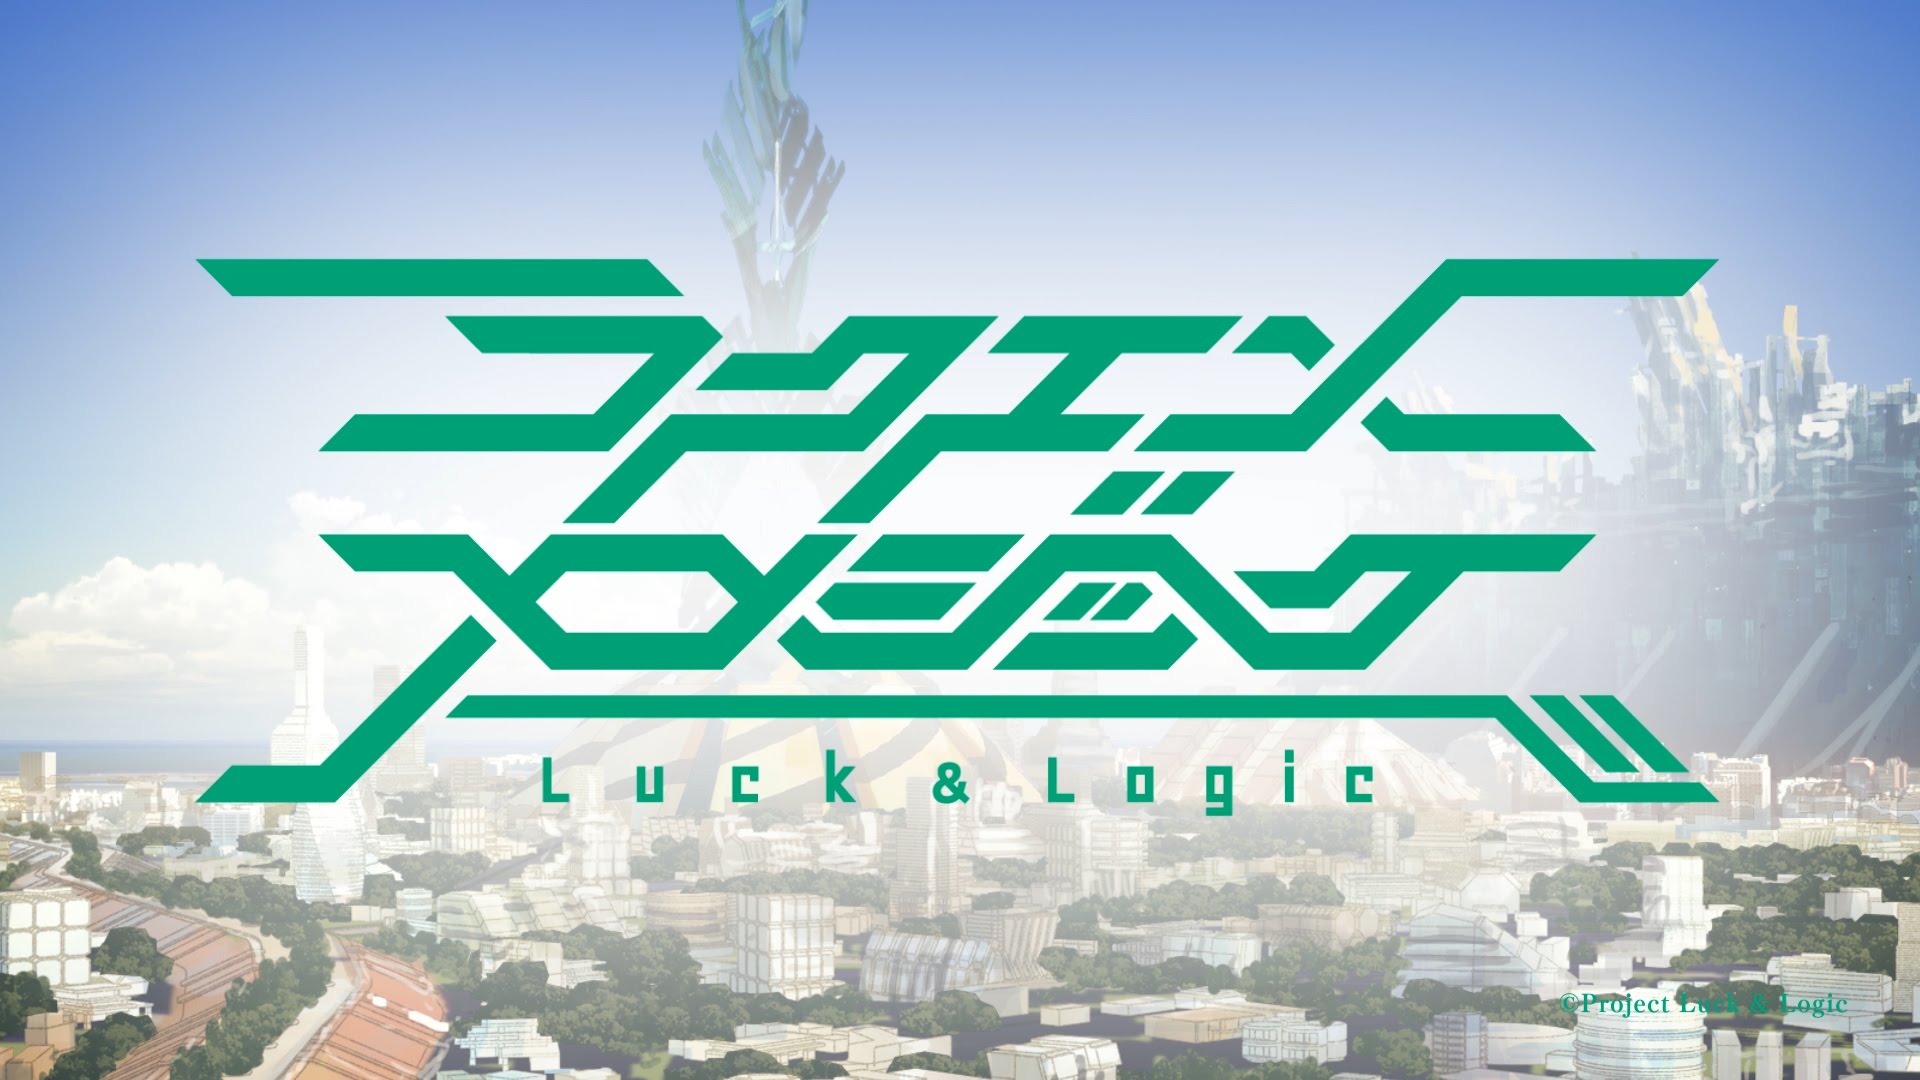 1 Luck Logic Hd Wallpapers Background Images Wallpaper Abyss